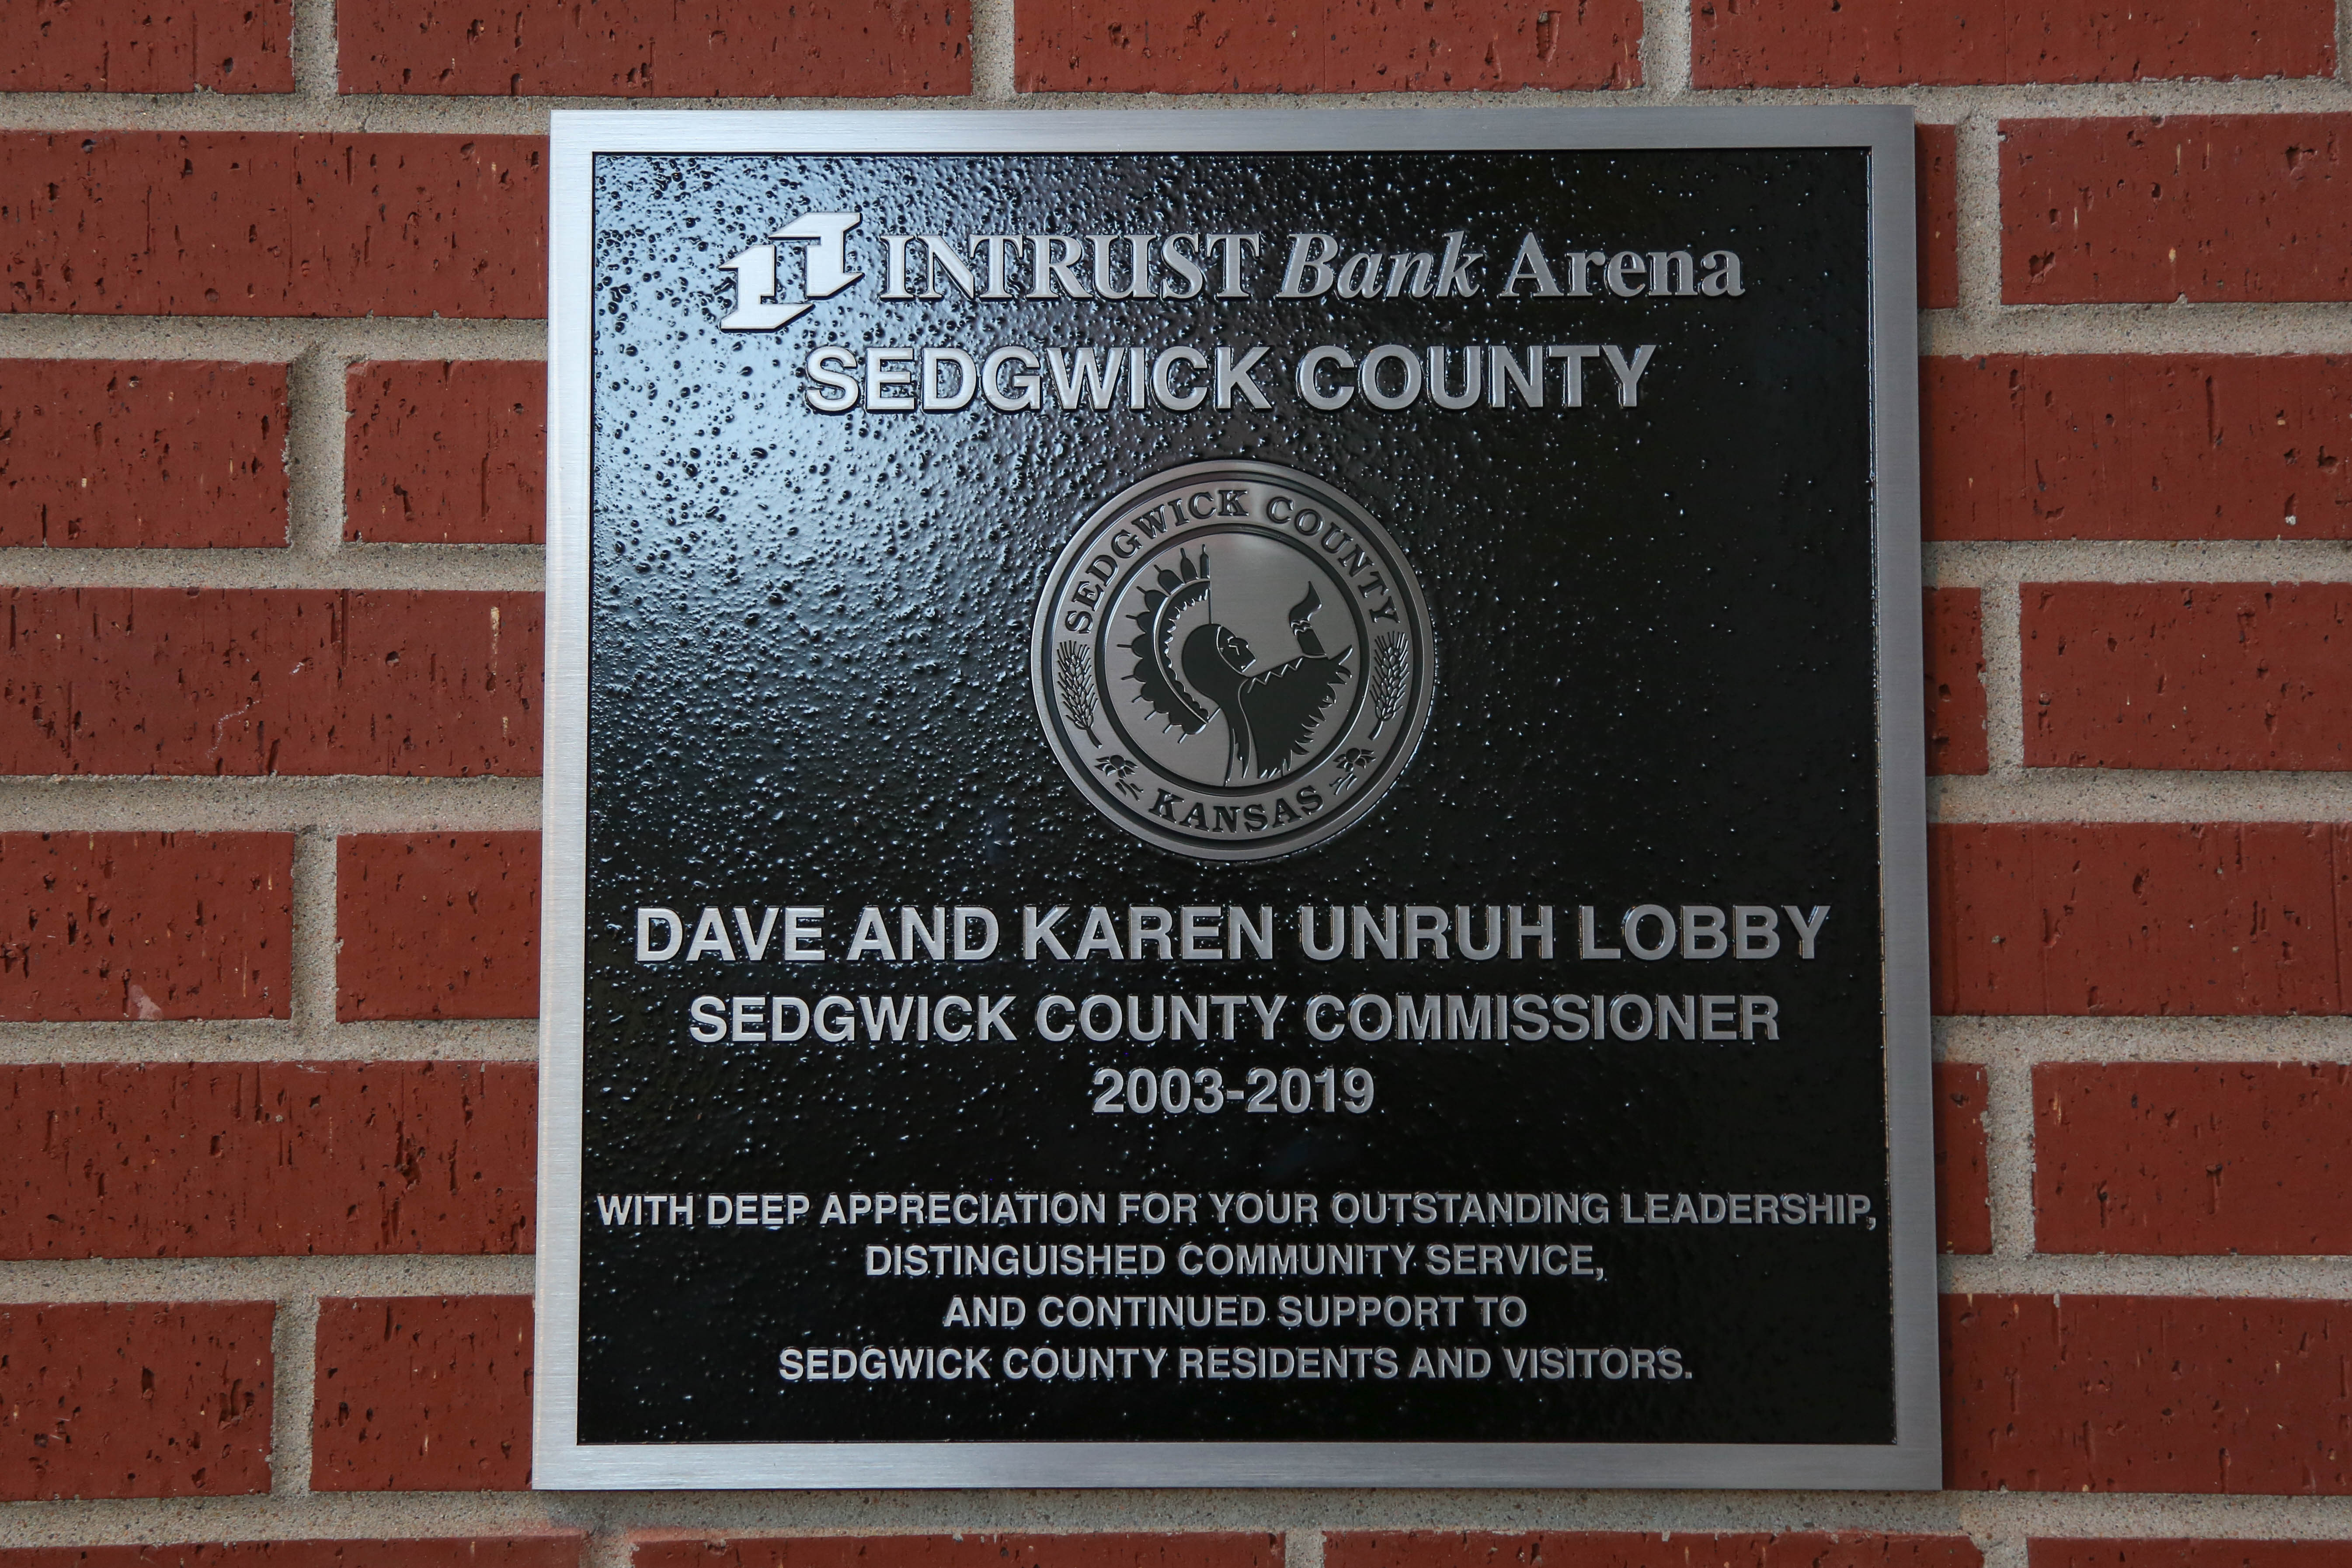 Plaque dedicating the Dave and Karen Unruh Lobby